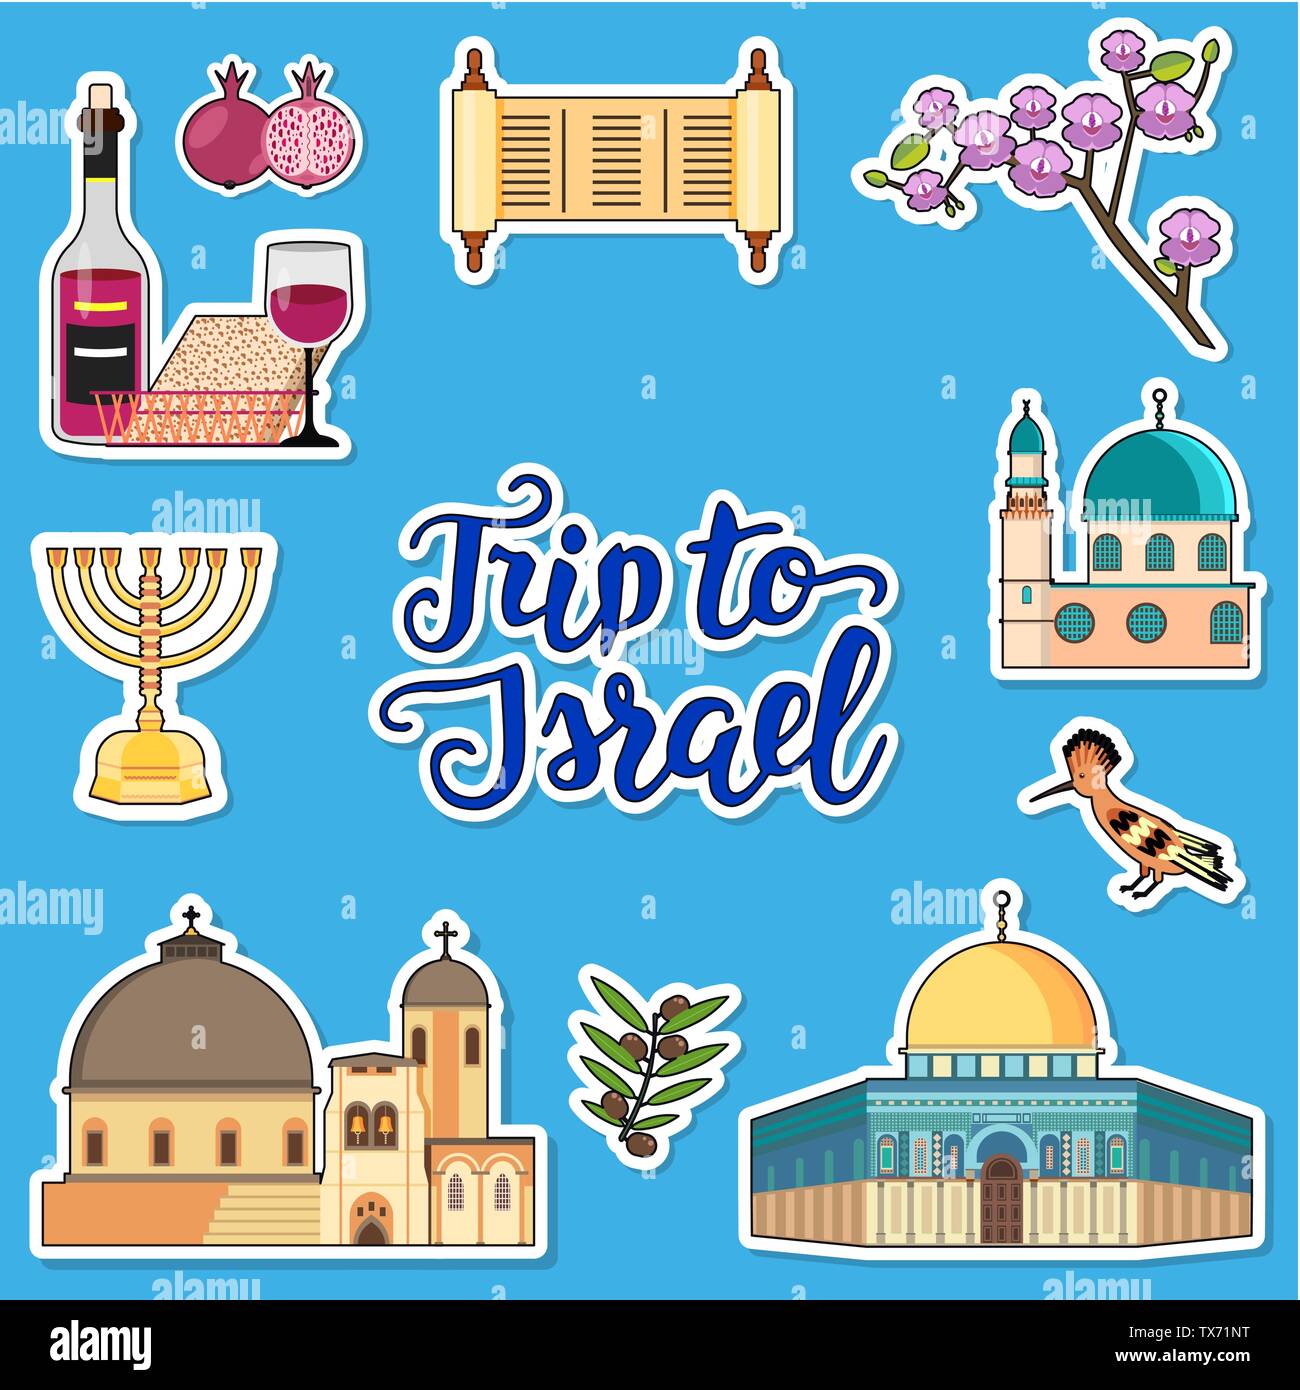 Country Israel travel vacation guide of goods, places and features. Set of architecture, fashion, people, items, nature background concept. Infographic template design on flat sticker style Stock Vector